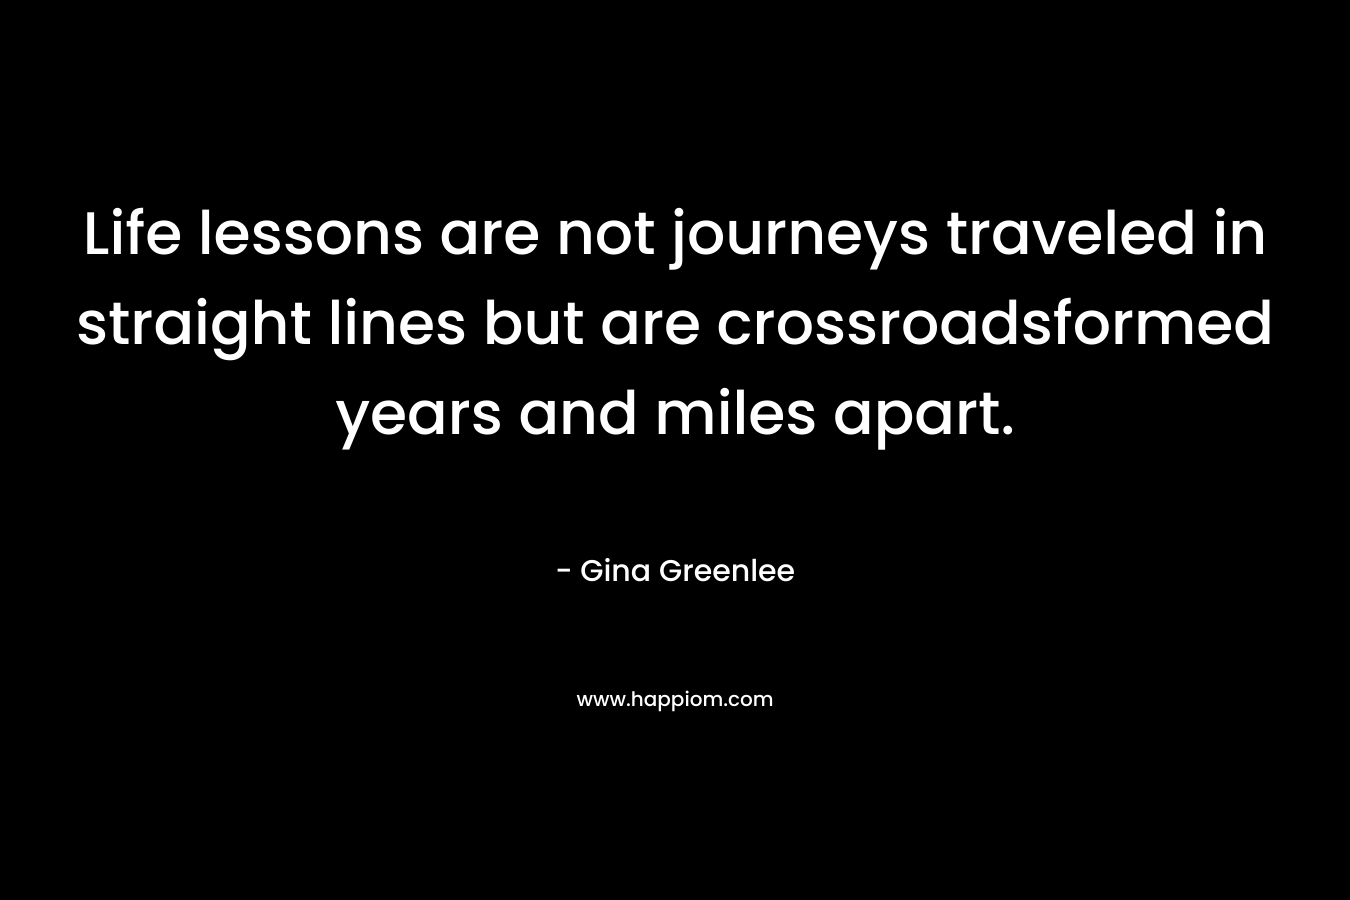 Life lessons are not journeys traveled in straight lines but are crossroadsformed years and miles apart. – Gina Greenlee